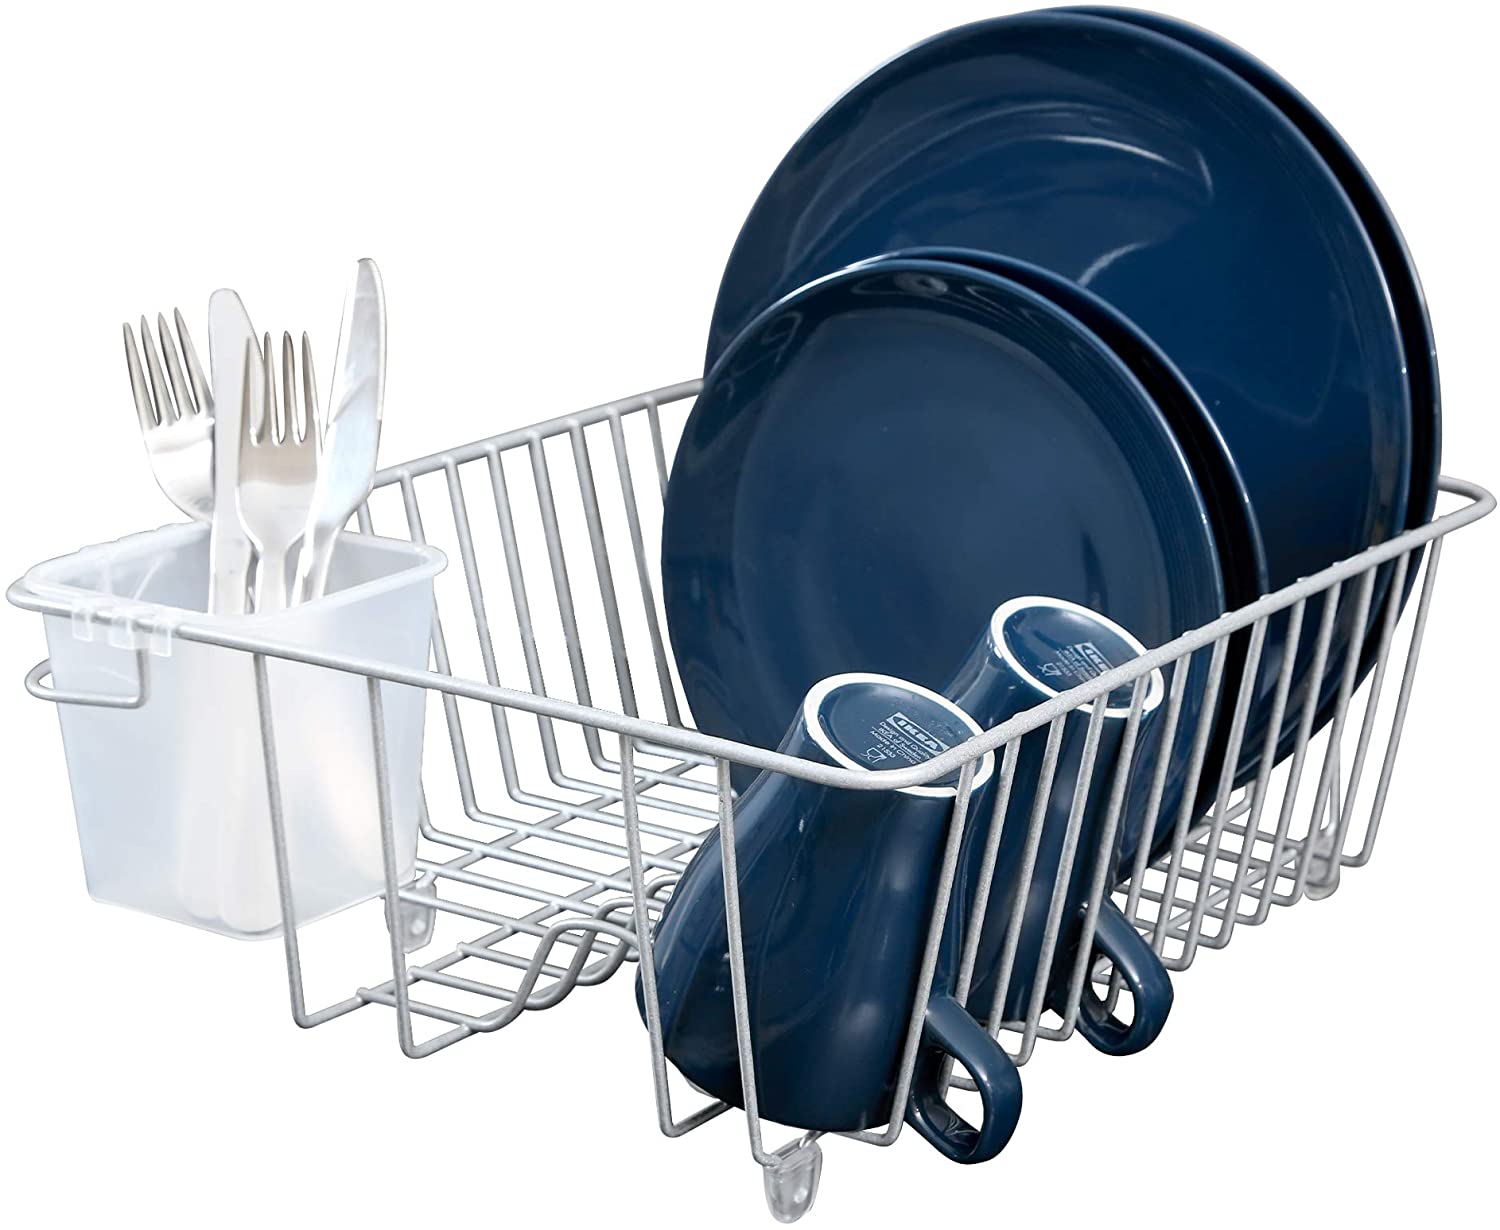 Smart Kitchen Space-Saver: Dish Drying Closet Above the Sink